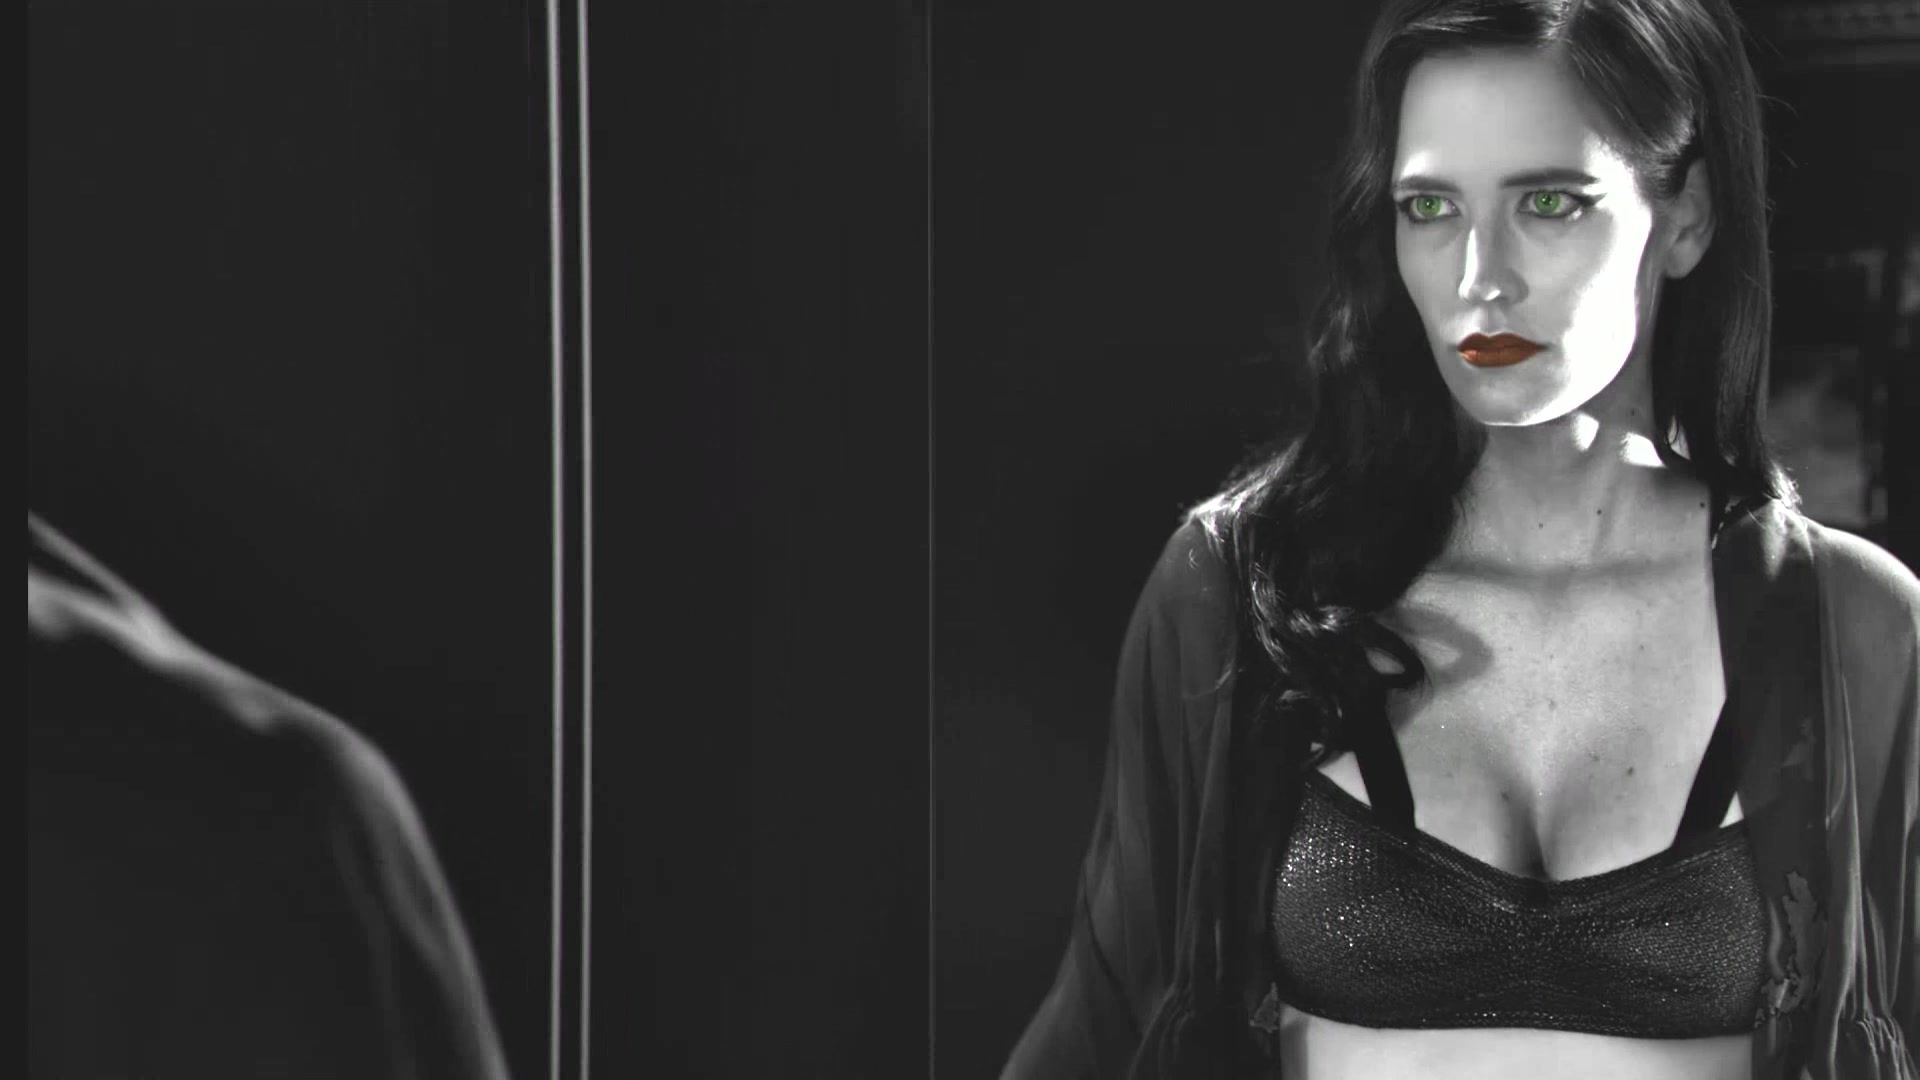 XXVideos Eva Green - Sin City 2 - A Dame To Kill For (2014) Full HD 1080 BR (Sex, Nude, FF) Gay Uncut